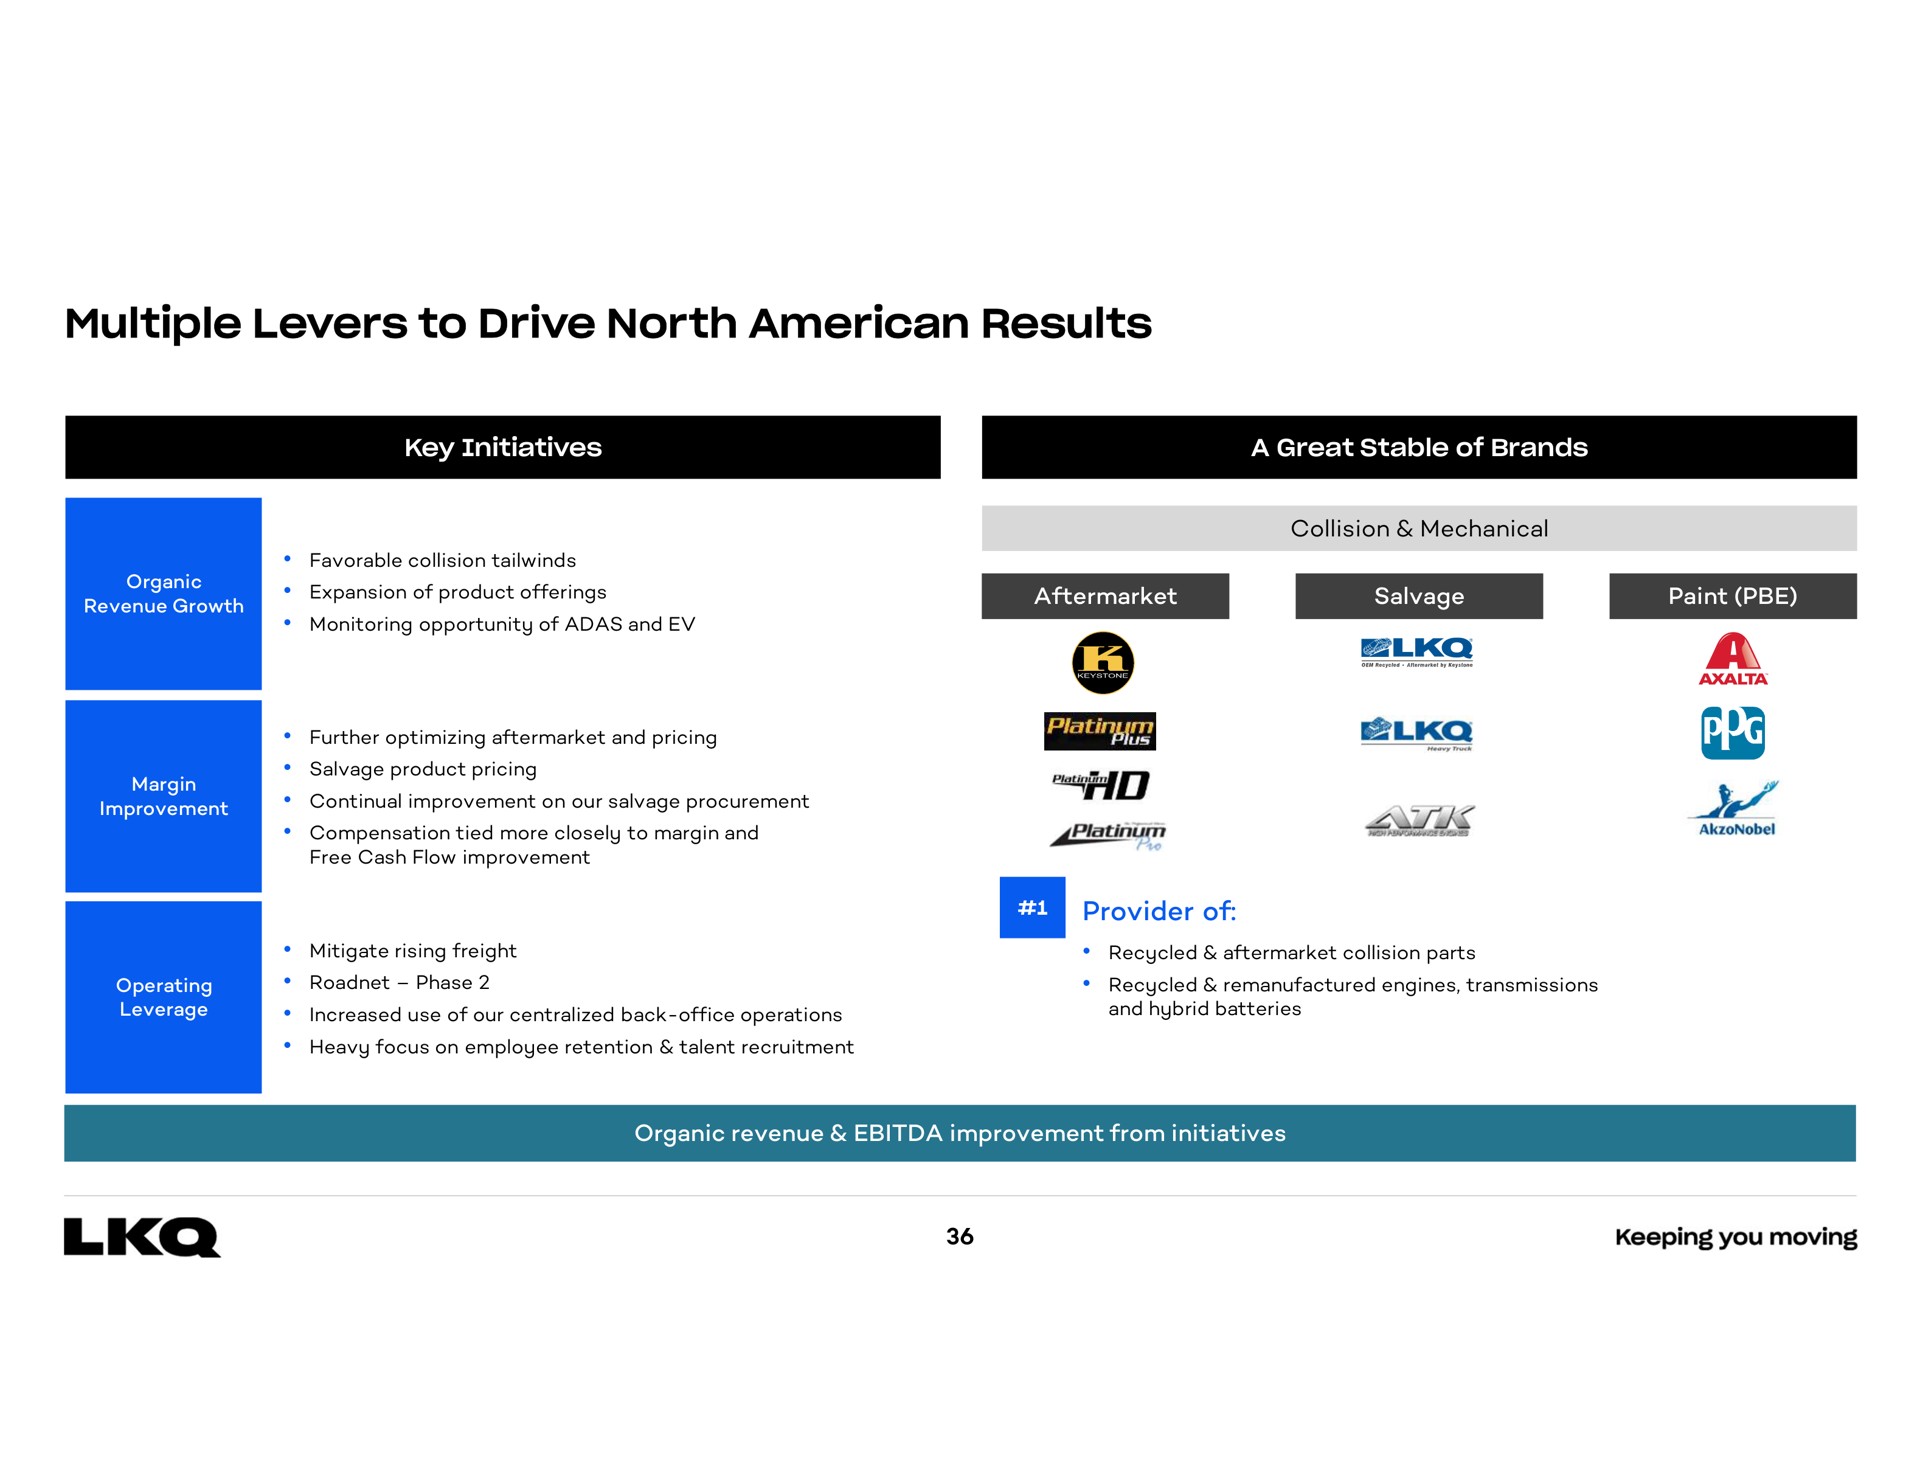 multiple levers to drive north results | LKQ